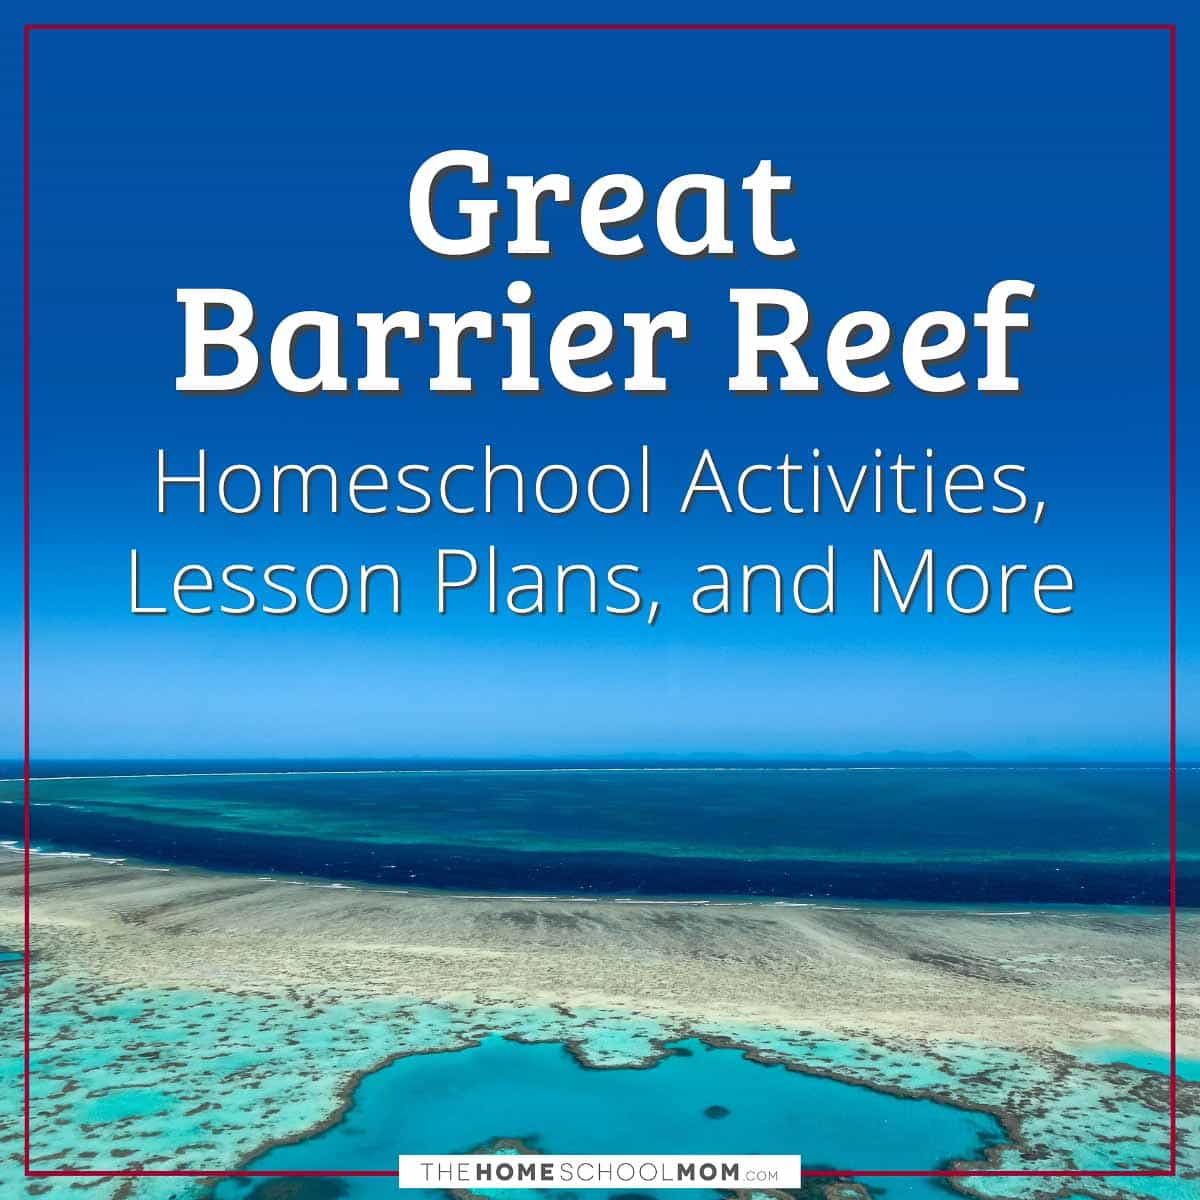 Great Barrier Reef Homeschool Activities, Lesson Plans, and More.